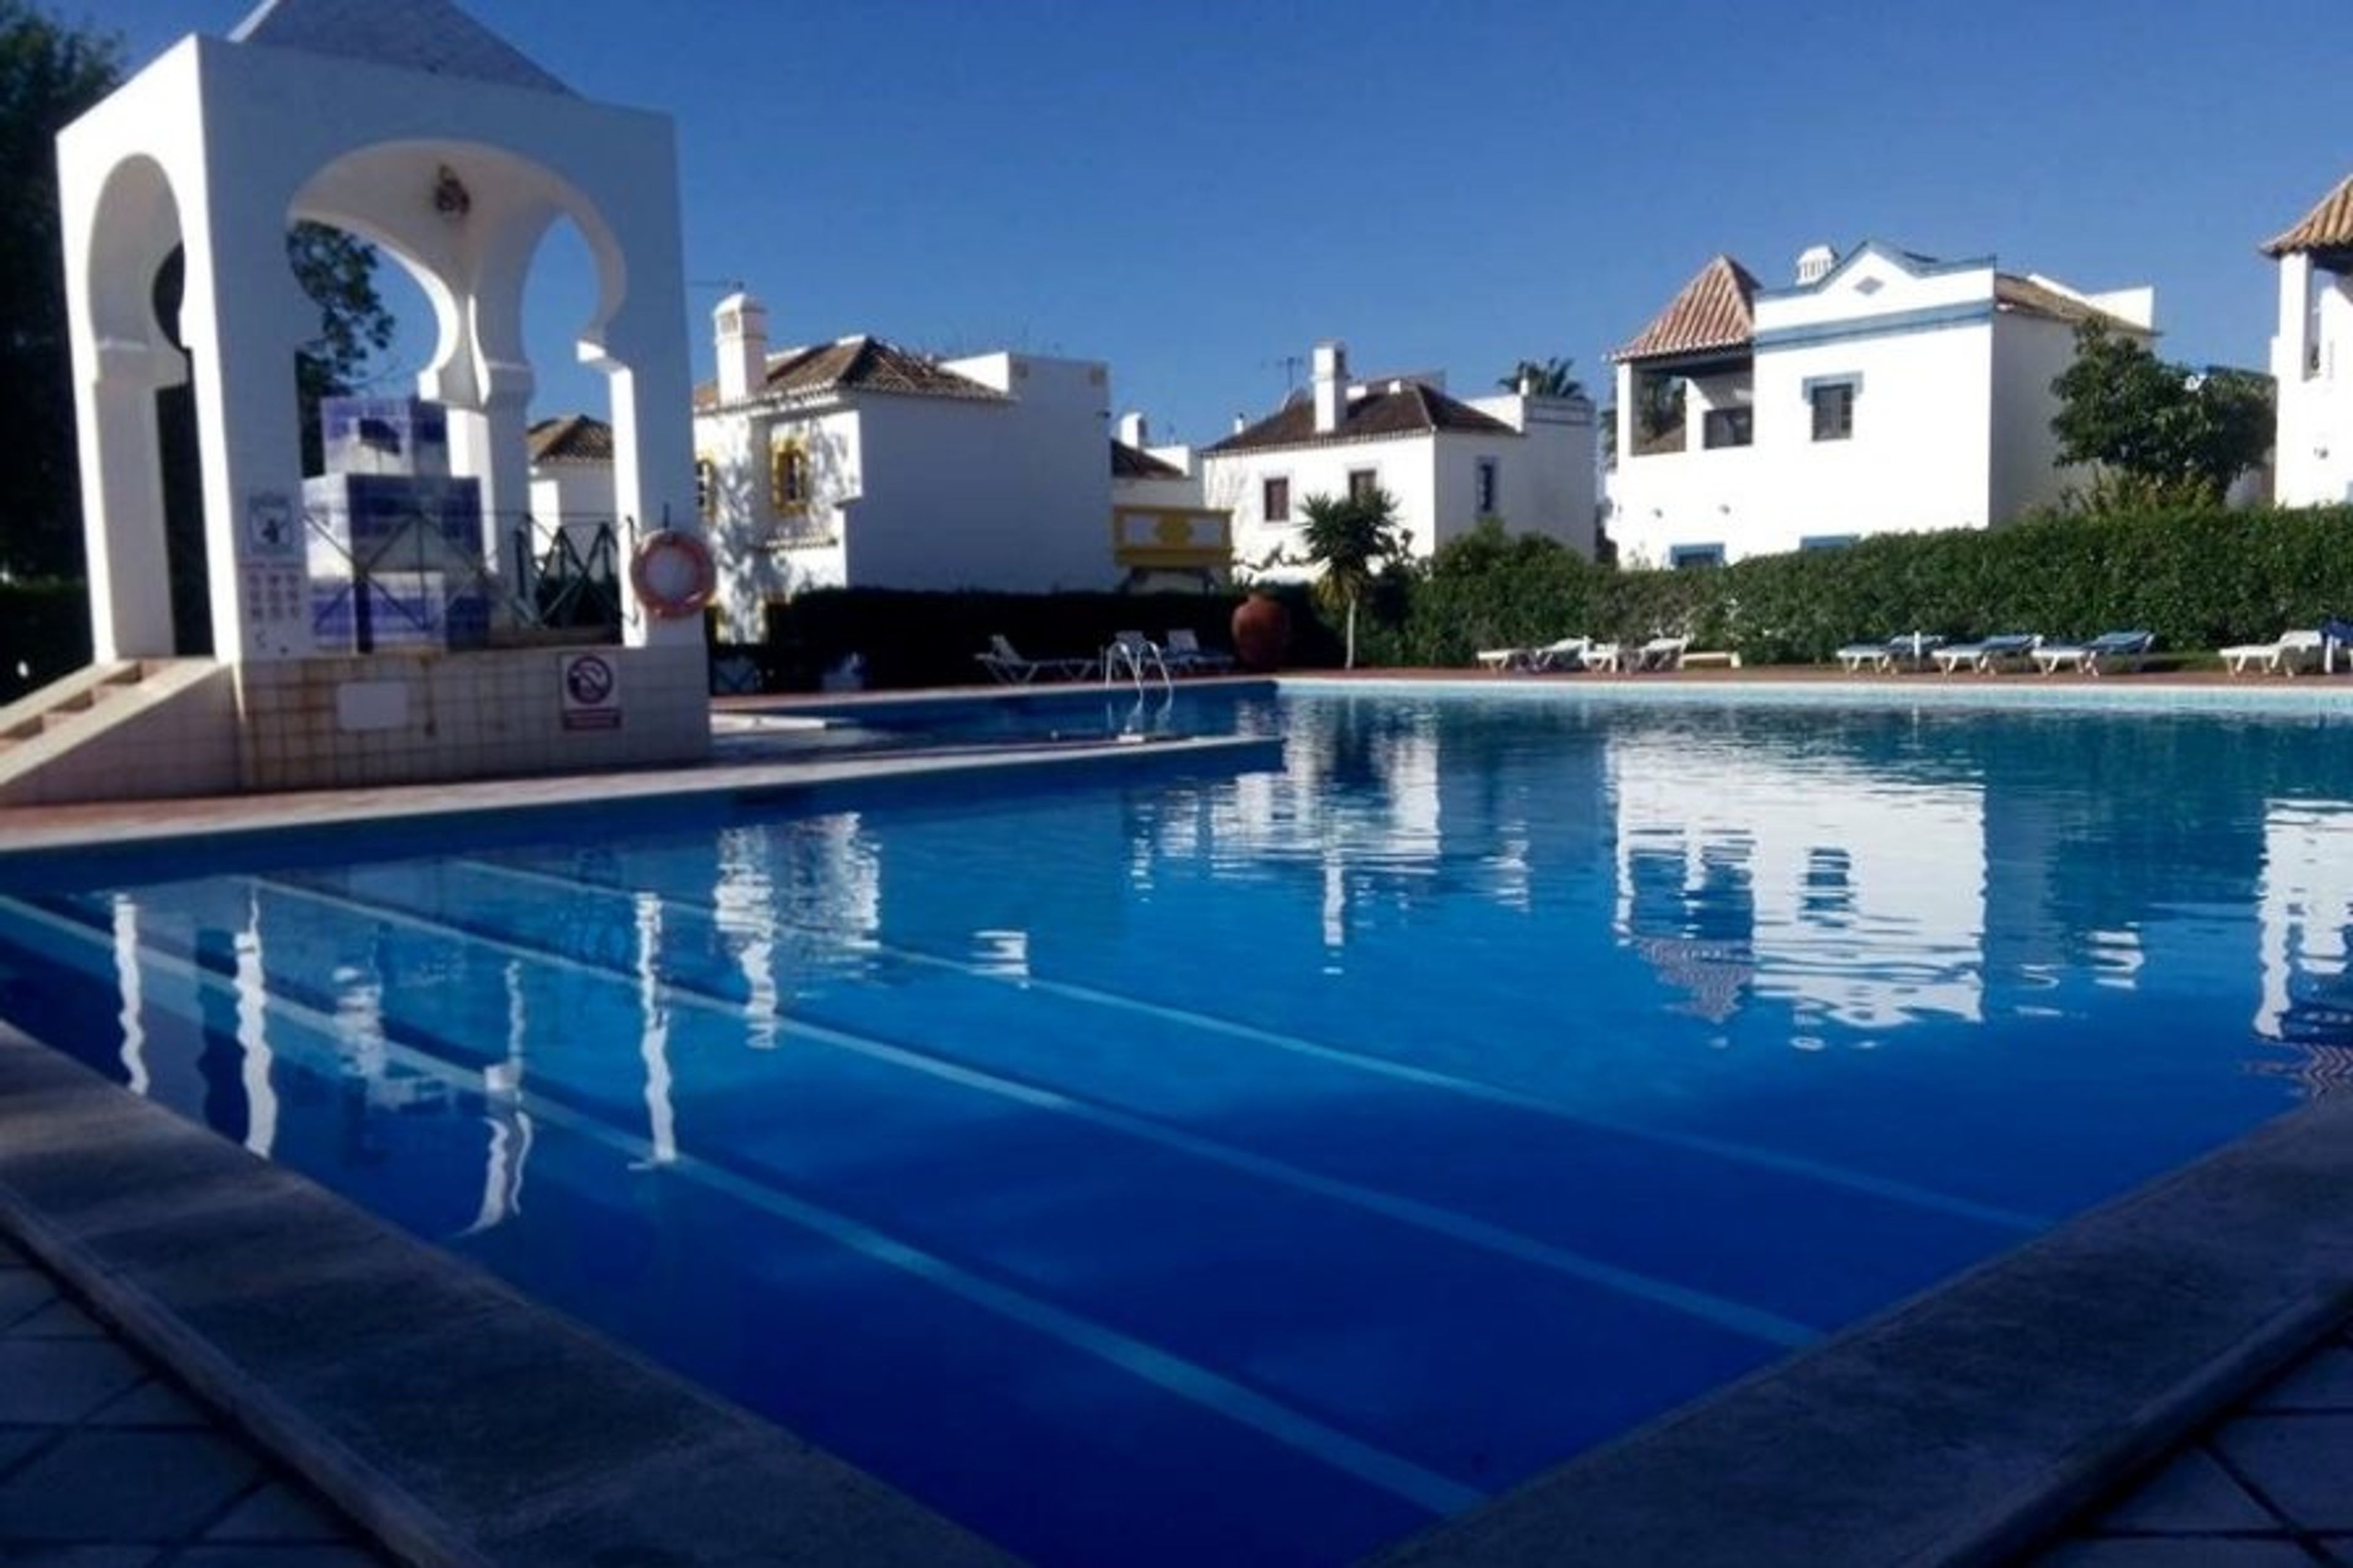 shared pool, 100m from villa 